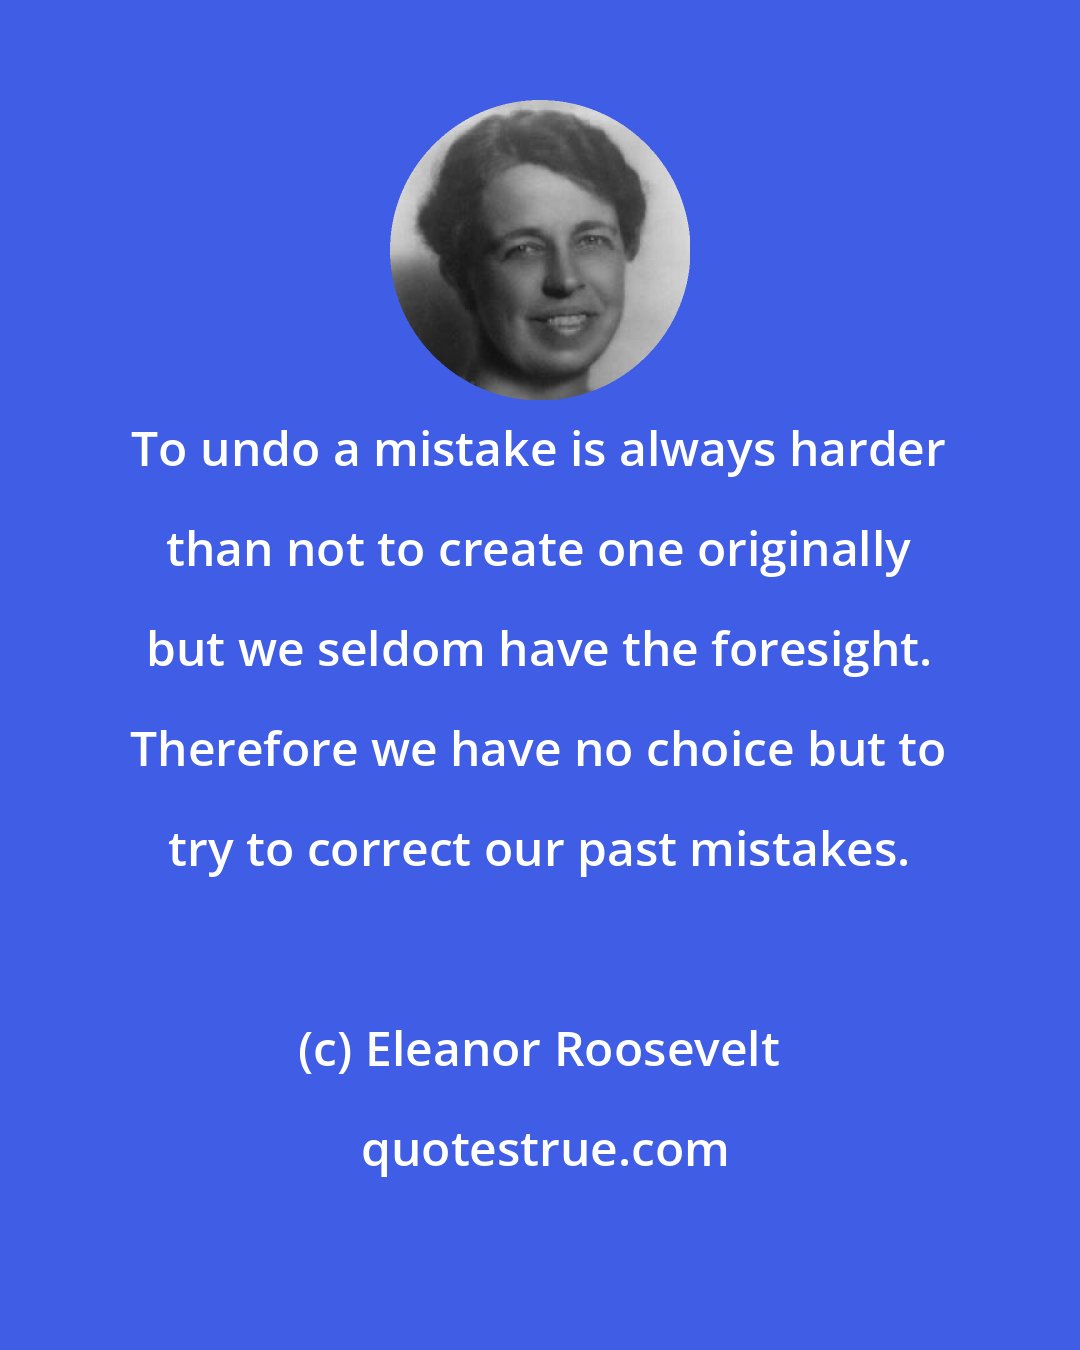 Eleanor Roosevelt: To undo a mistake is always harder than not to create one originally but we seldom have the foresight. Therefore we have no choice but to try to correct our past mistakes.